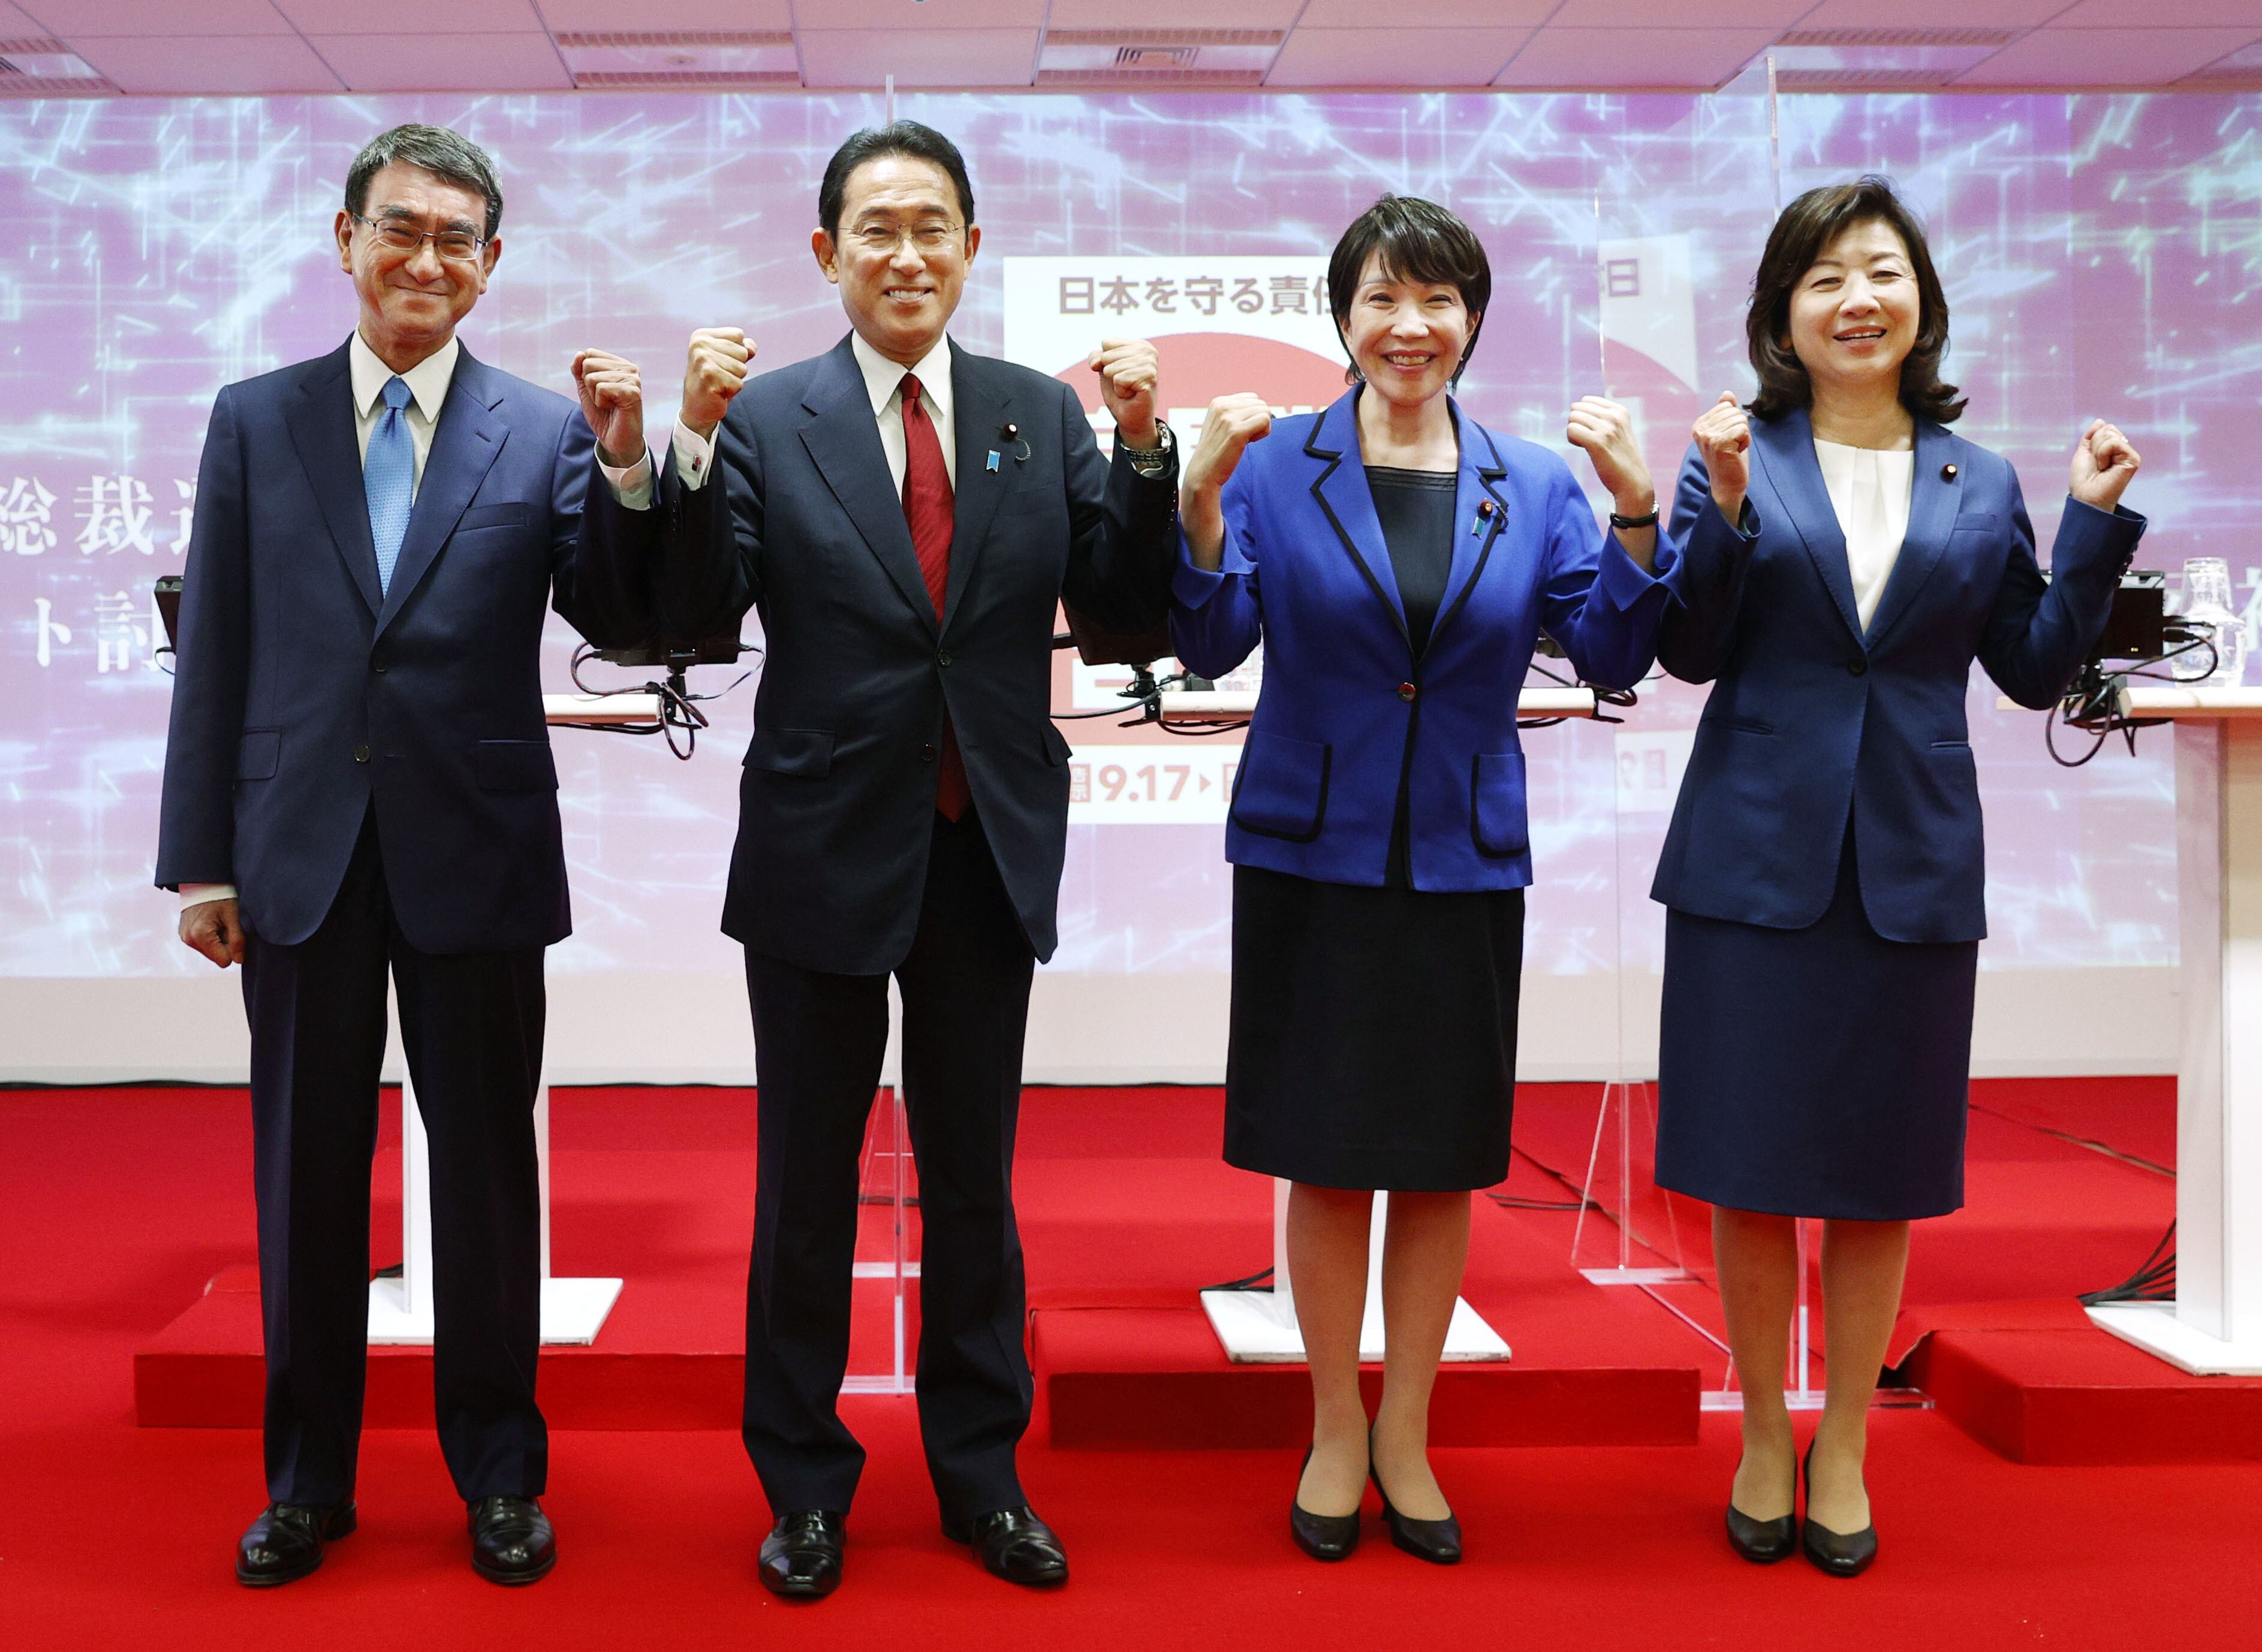 The four candidates running in the presidential election of Japan's ruling Liberal Democratic Party pose after attending a debate. From left: Taro Kono, Fumio Kishida, Sanae Takaichi and Seiko Noda. Photo: Kyodo